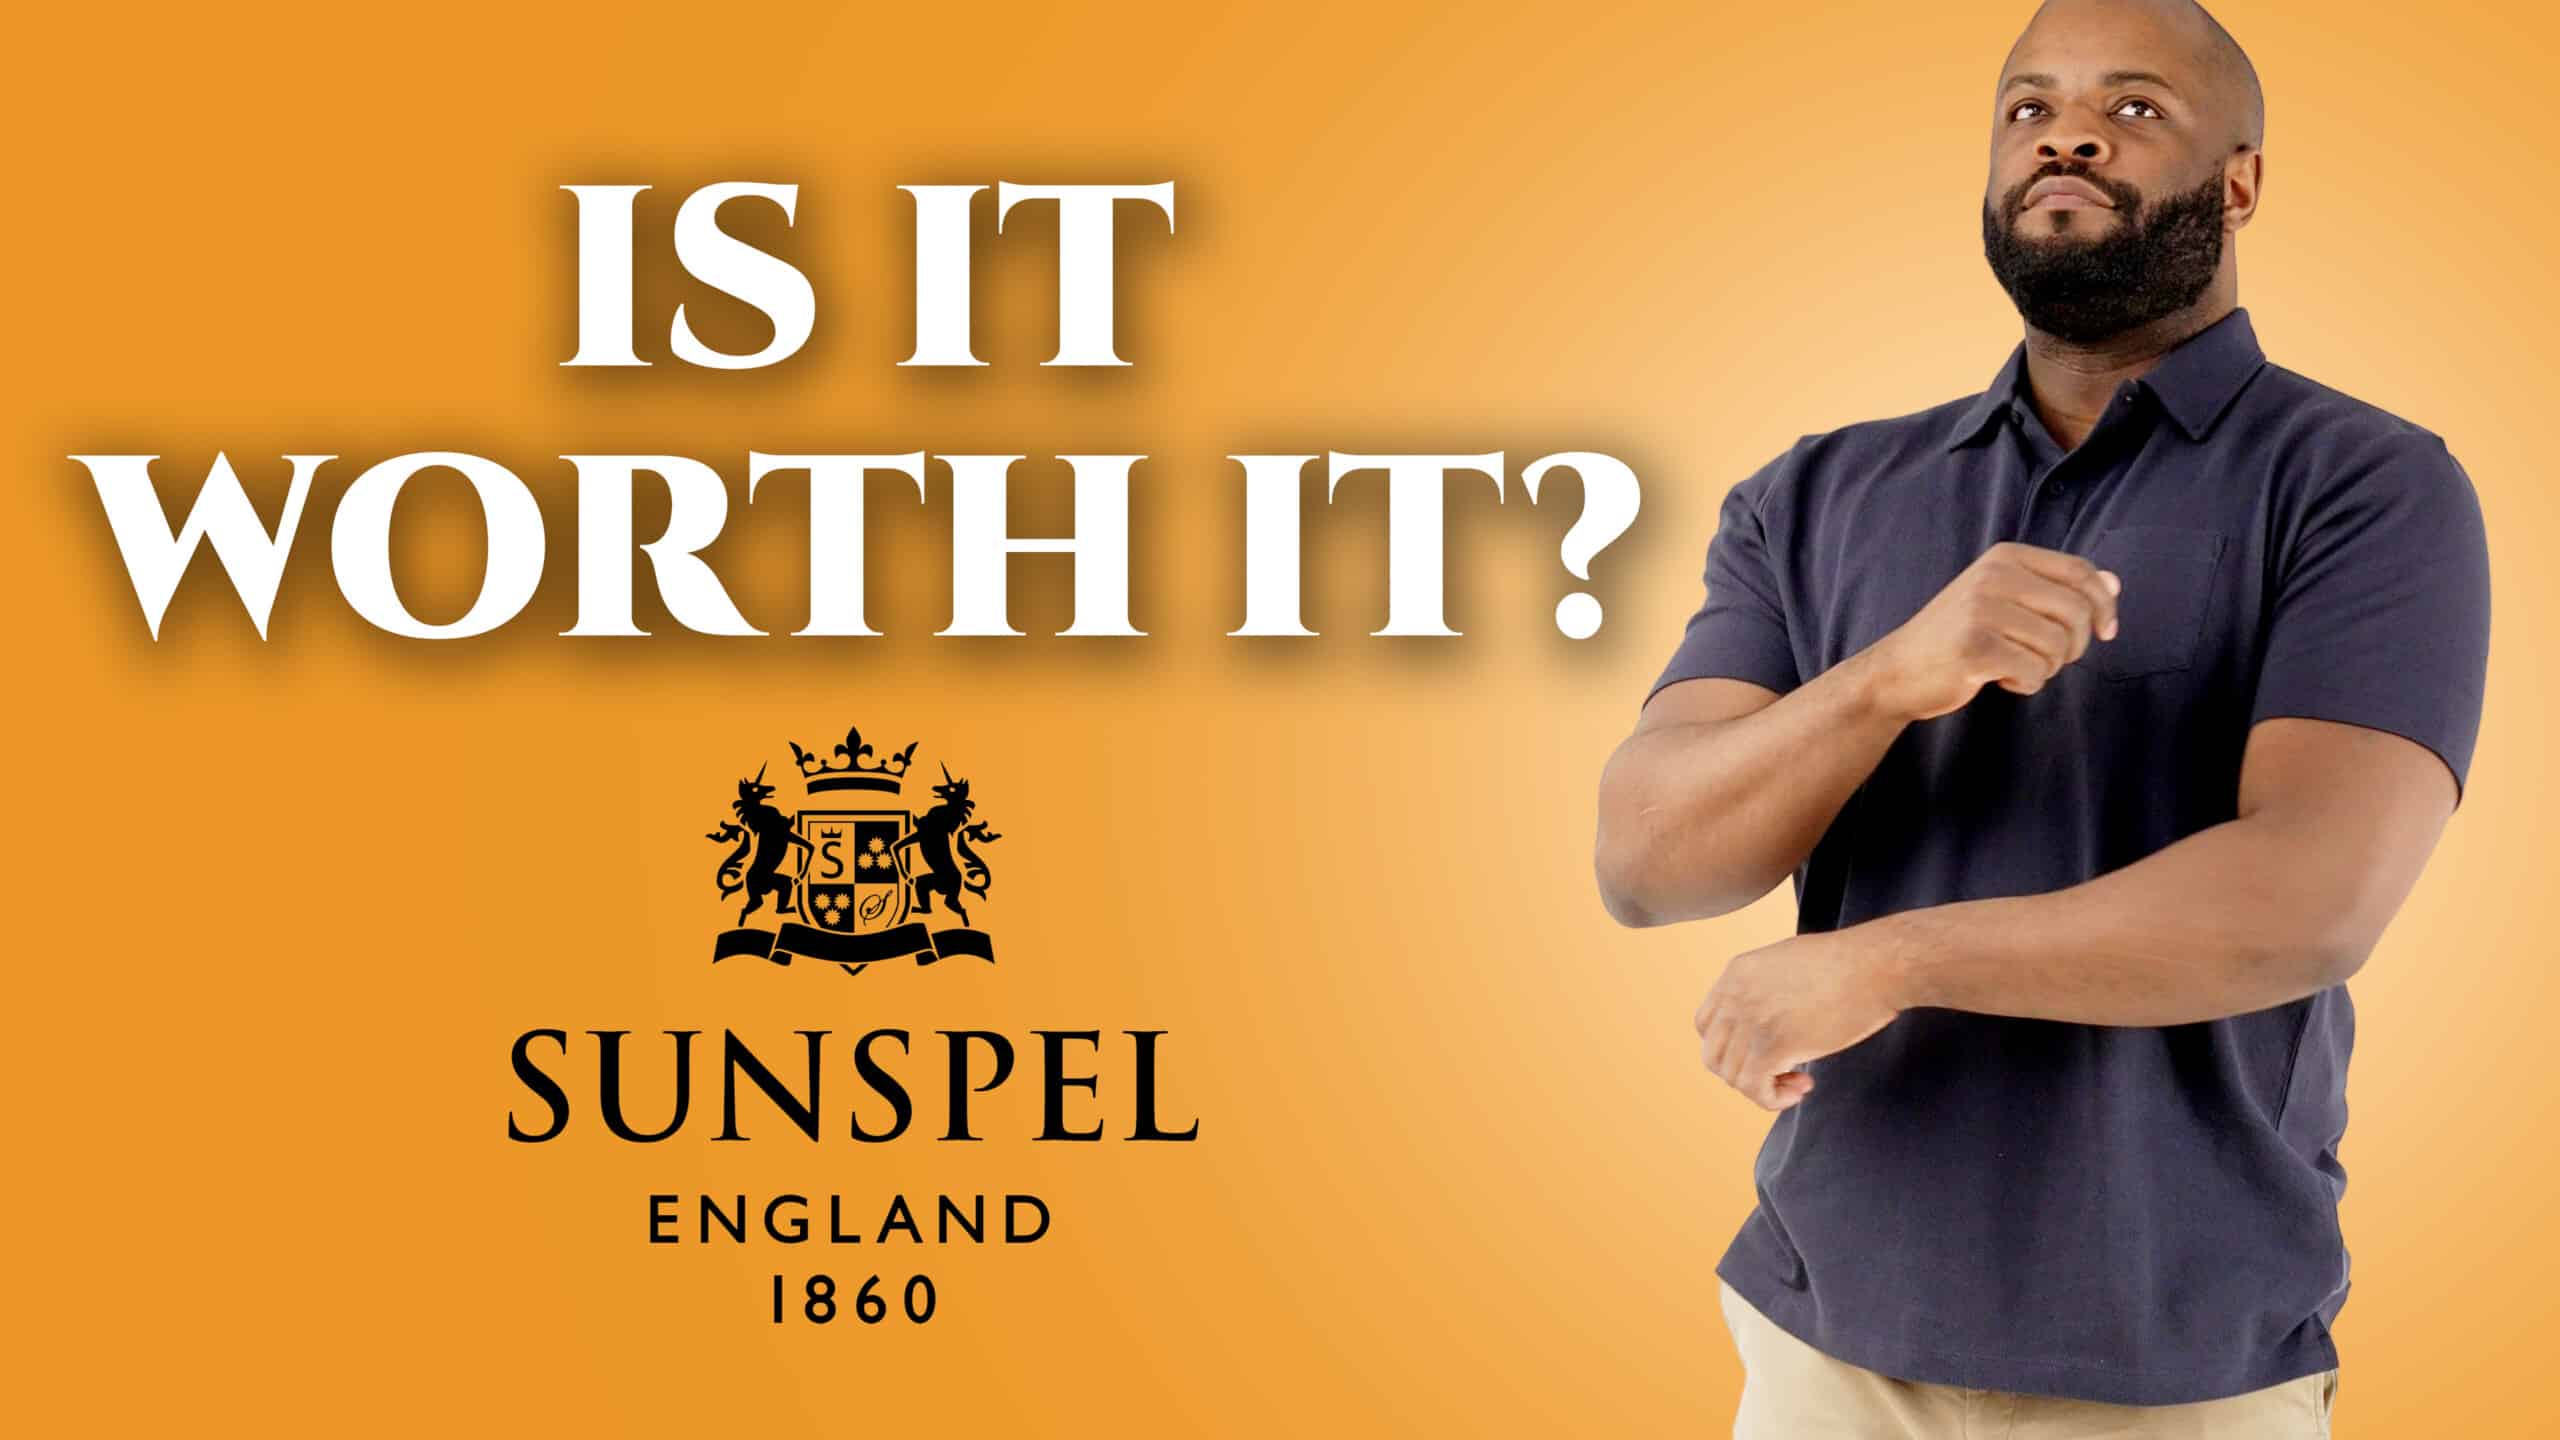 Sunspel Polo Shirts & T-Shirts: Is It Worth It? (Review)